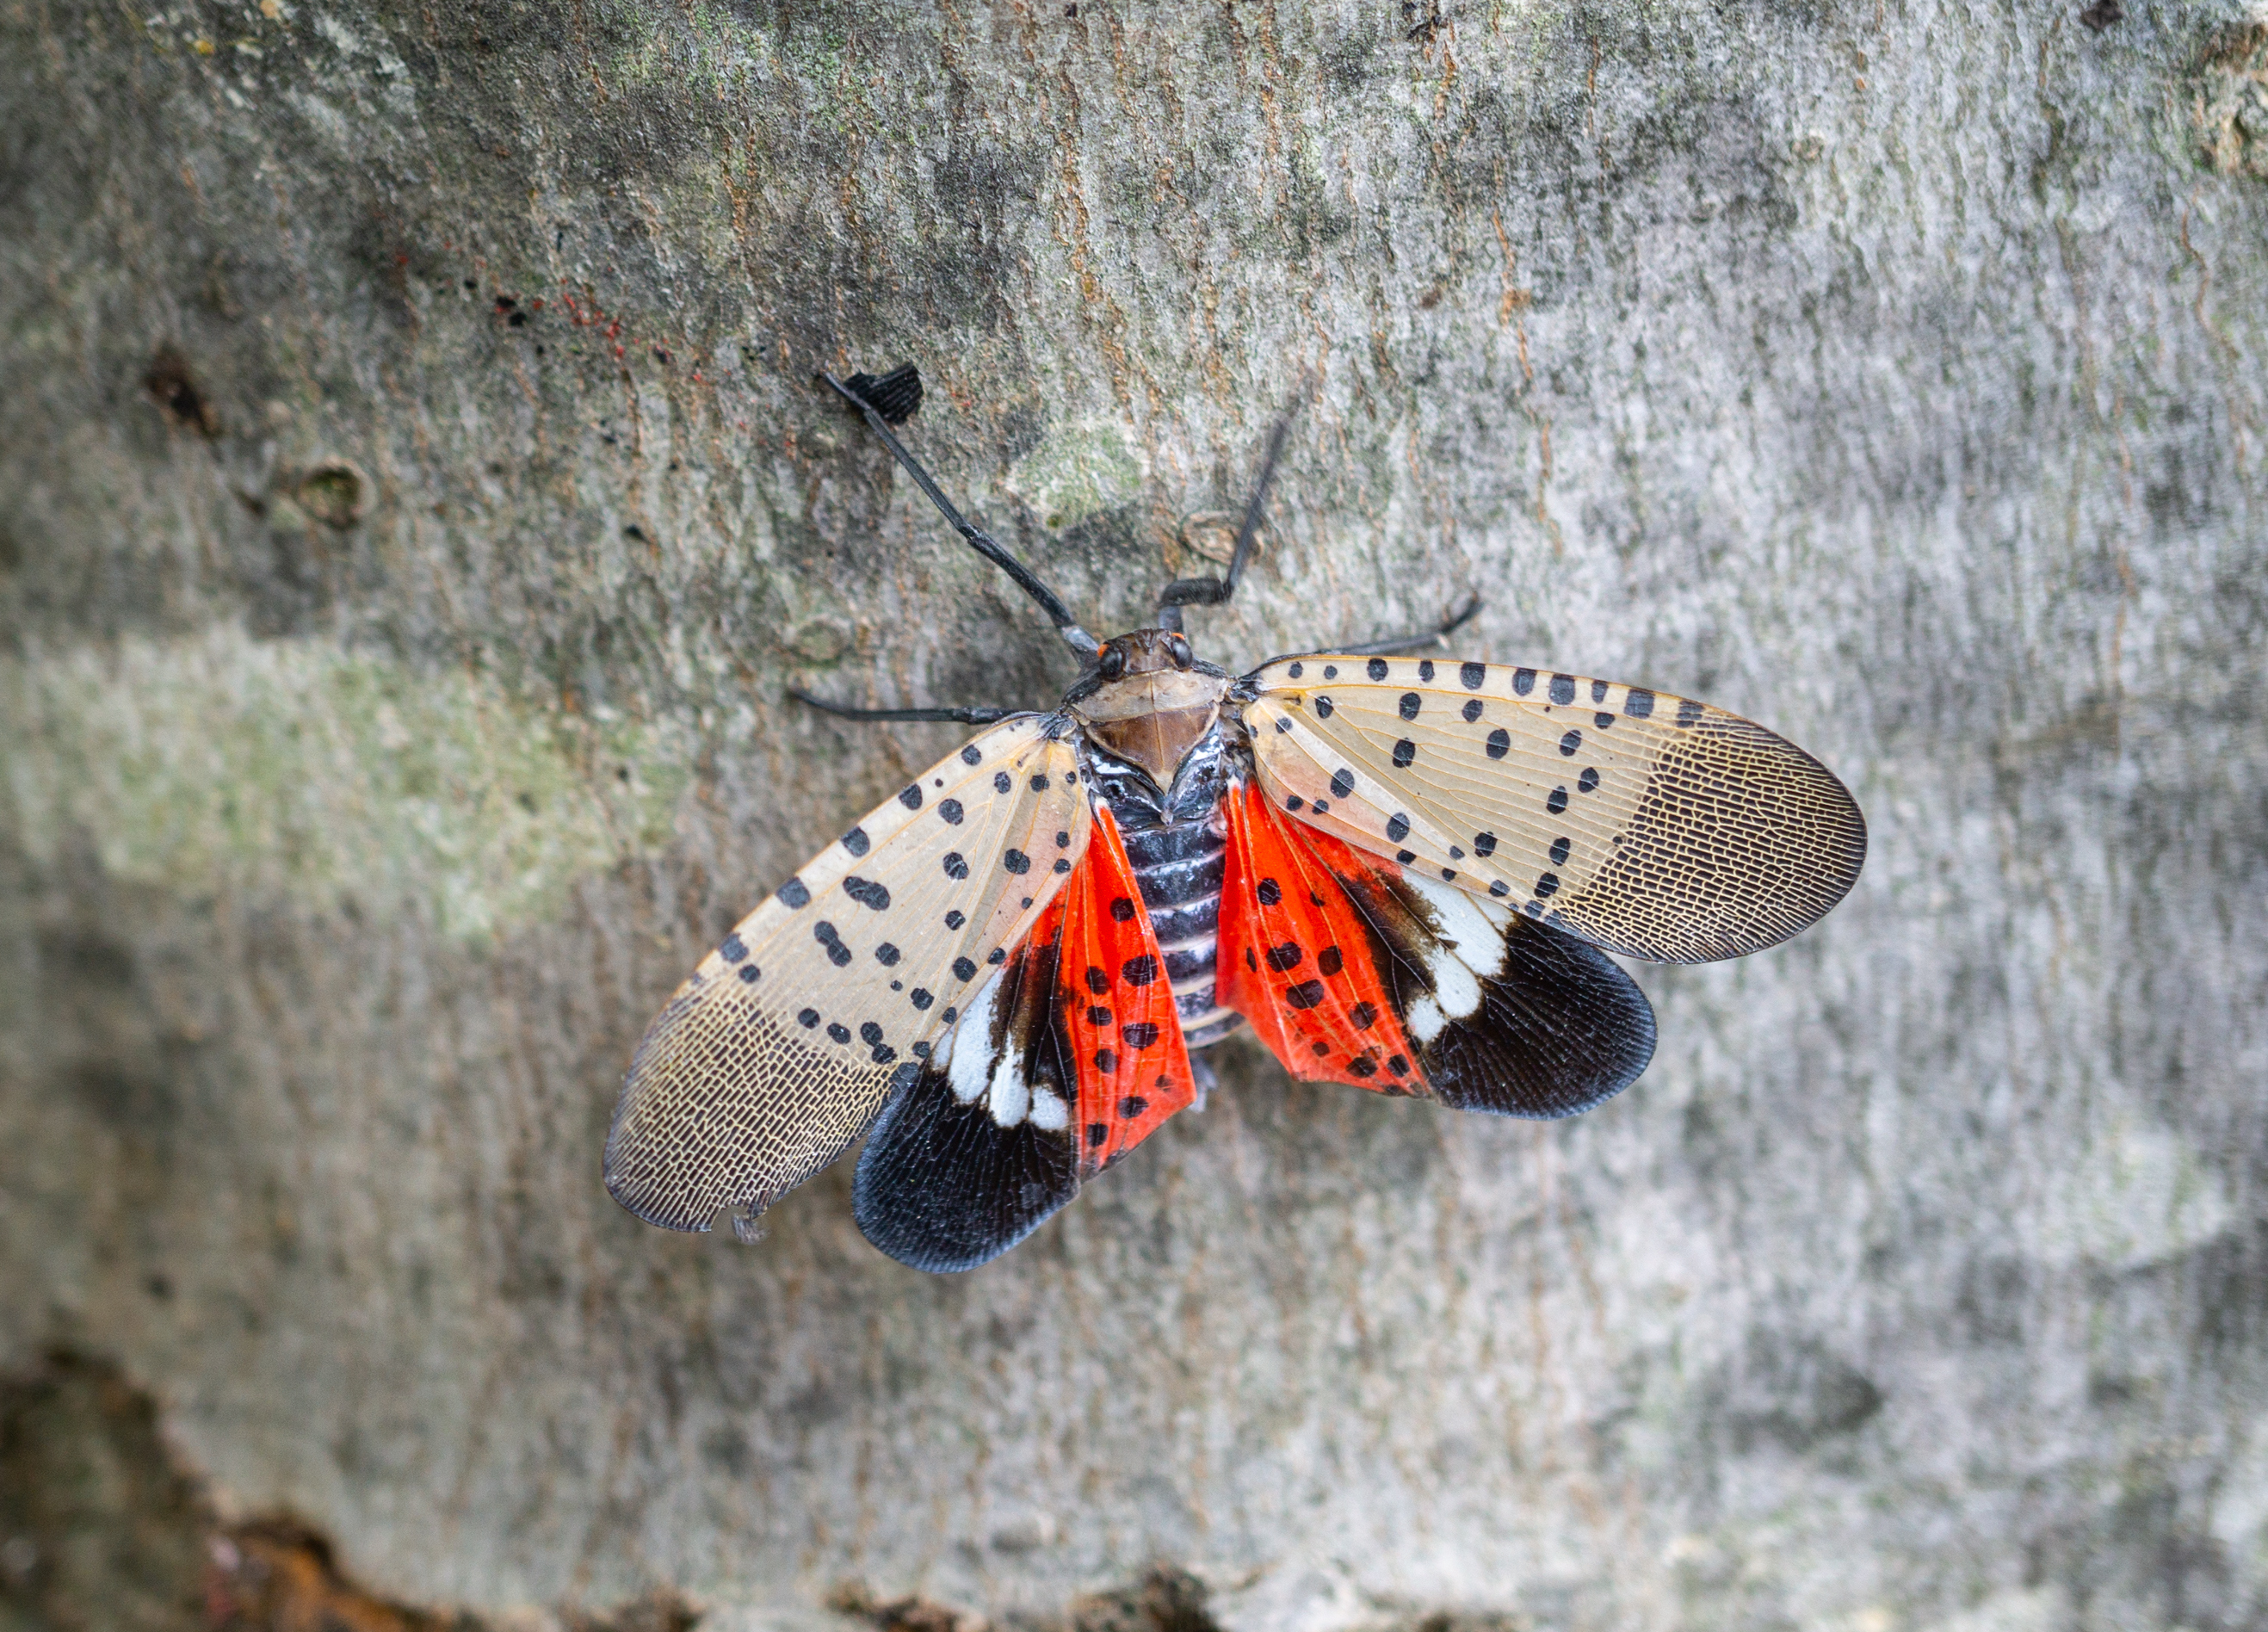 Spotted Lanternfly wings - moth like bug with spots on wings